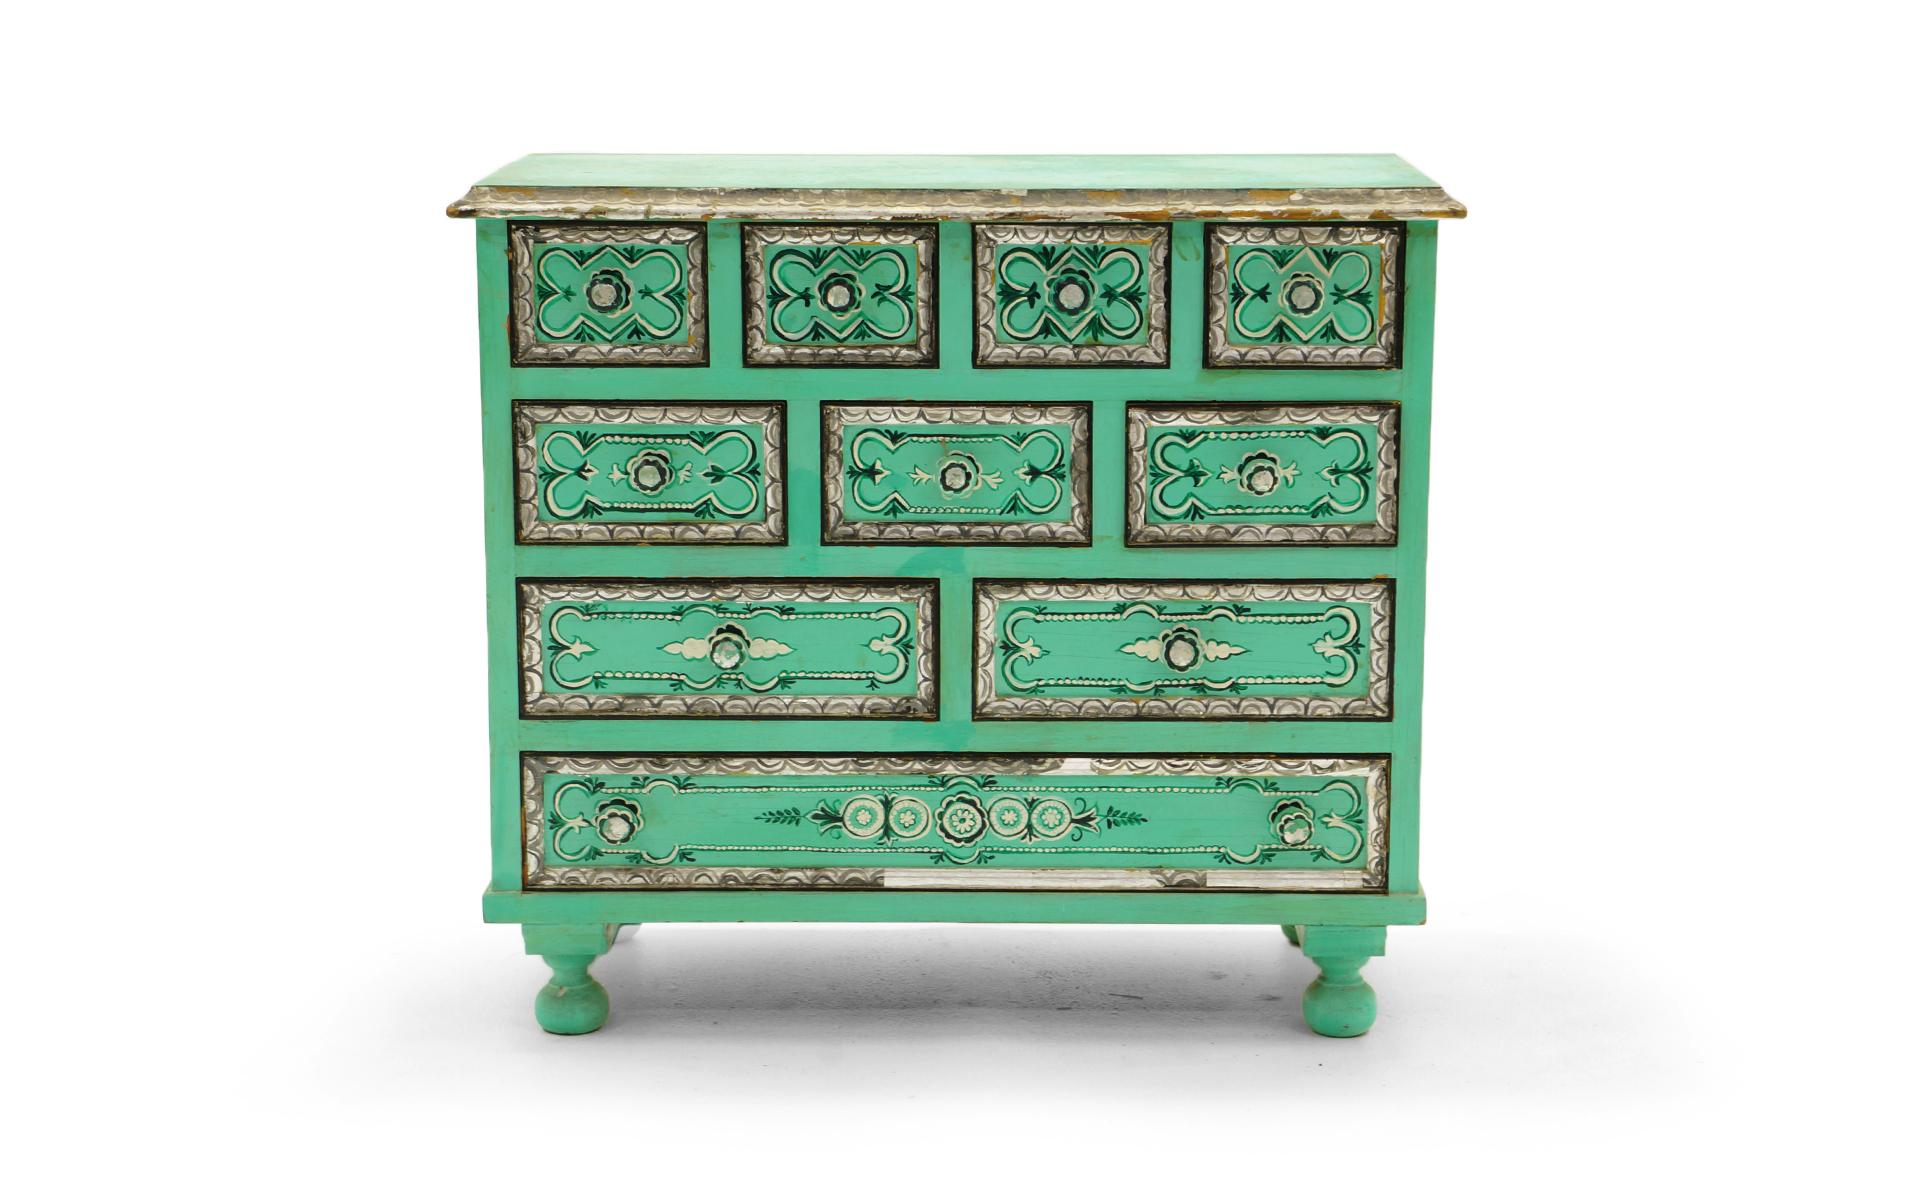 Beutiful Salvador Corona hand painted and signed cabinet with drawers, Mexico / Tucson, 1940s. Good original condition with honest attractive wear.